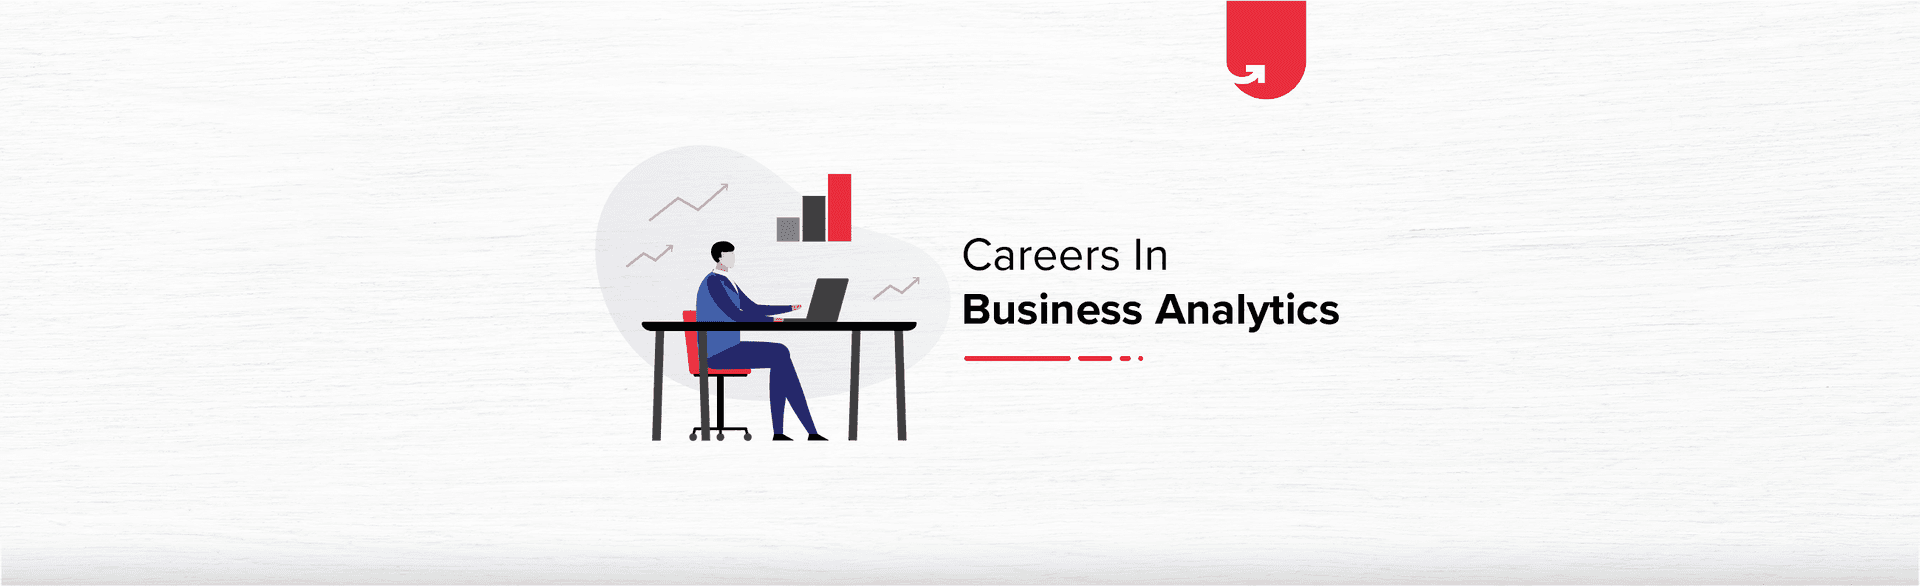 Career Options in Business Analytics